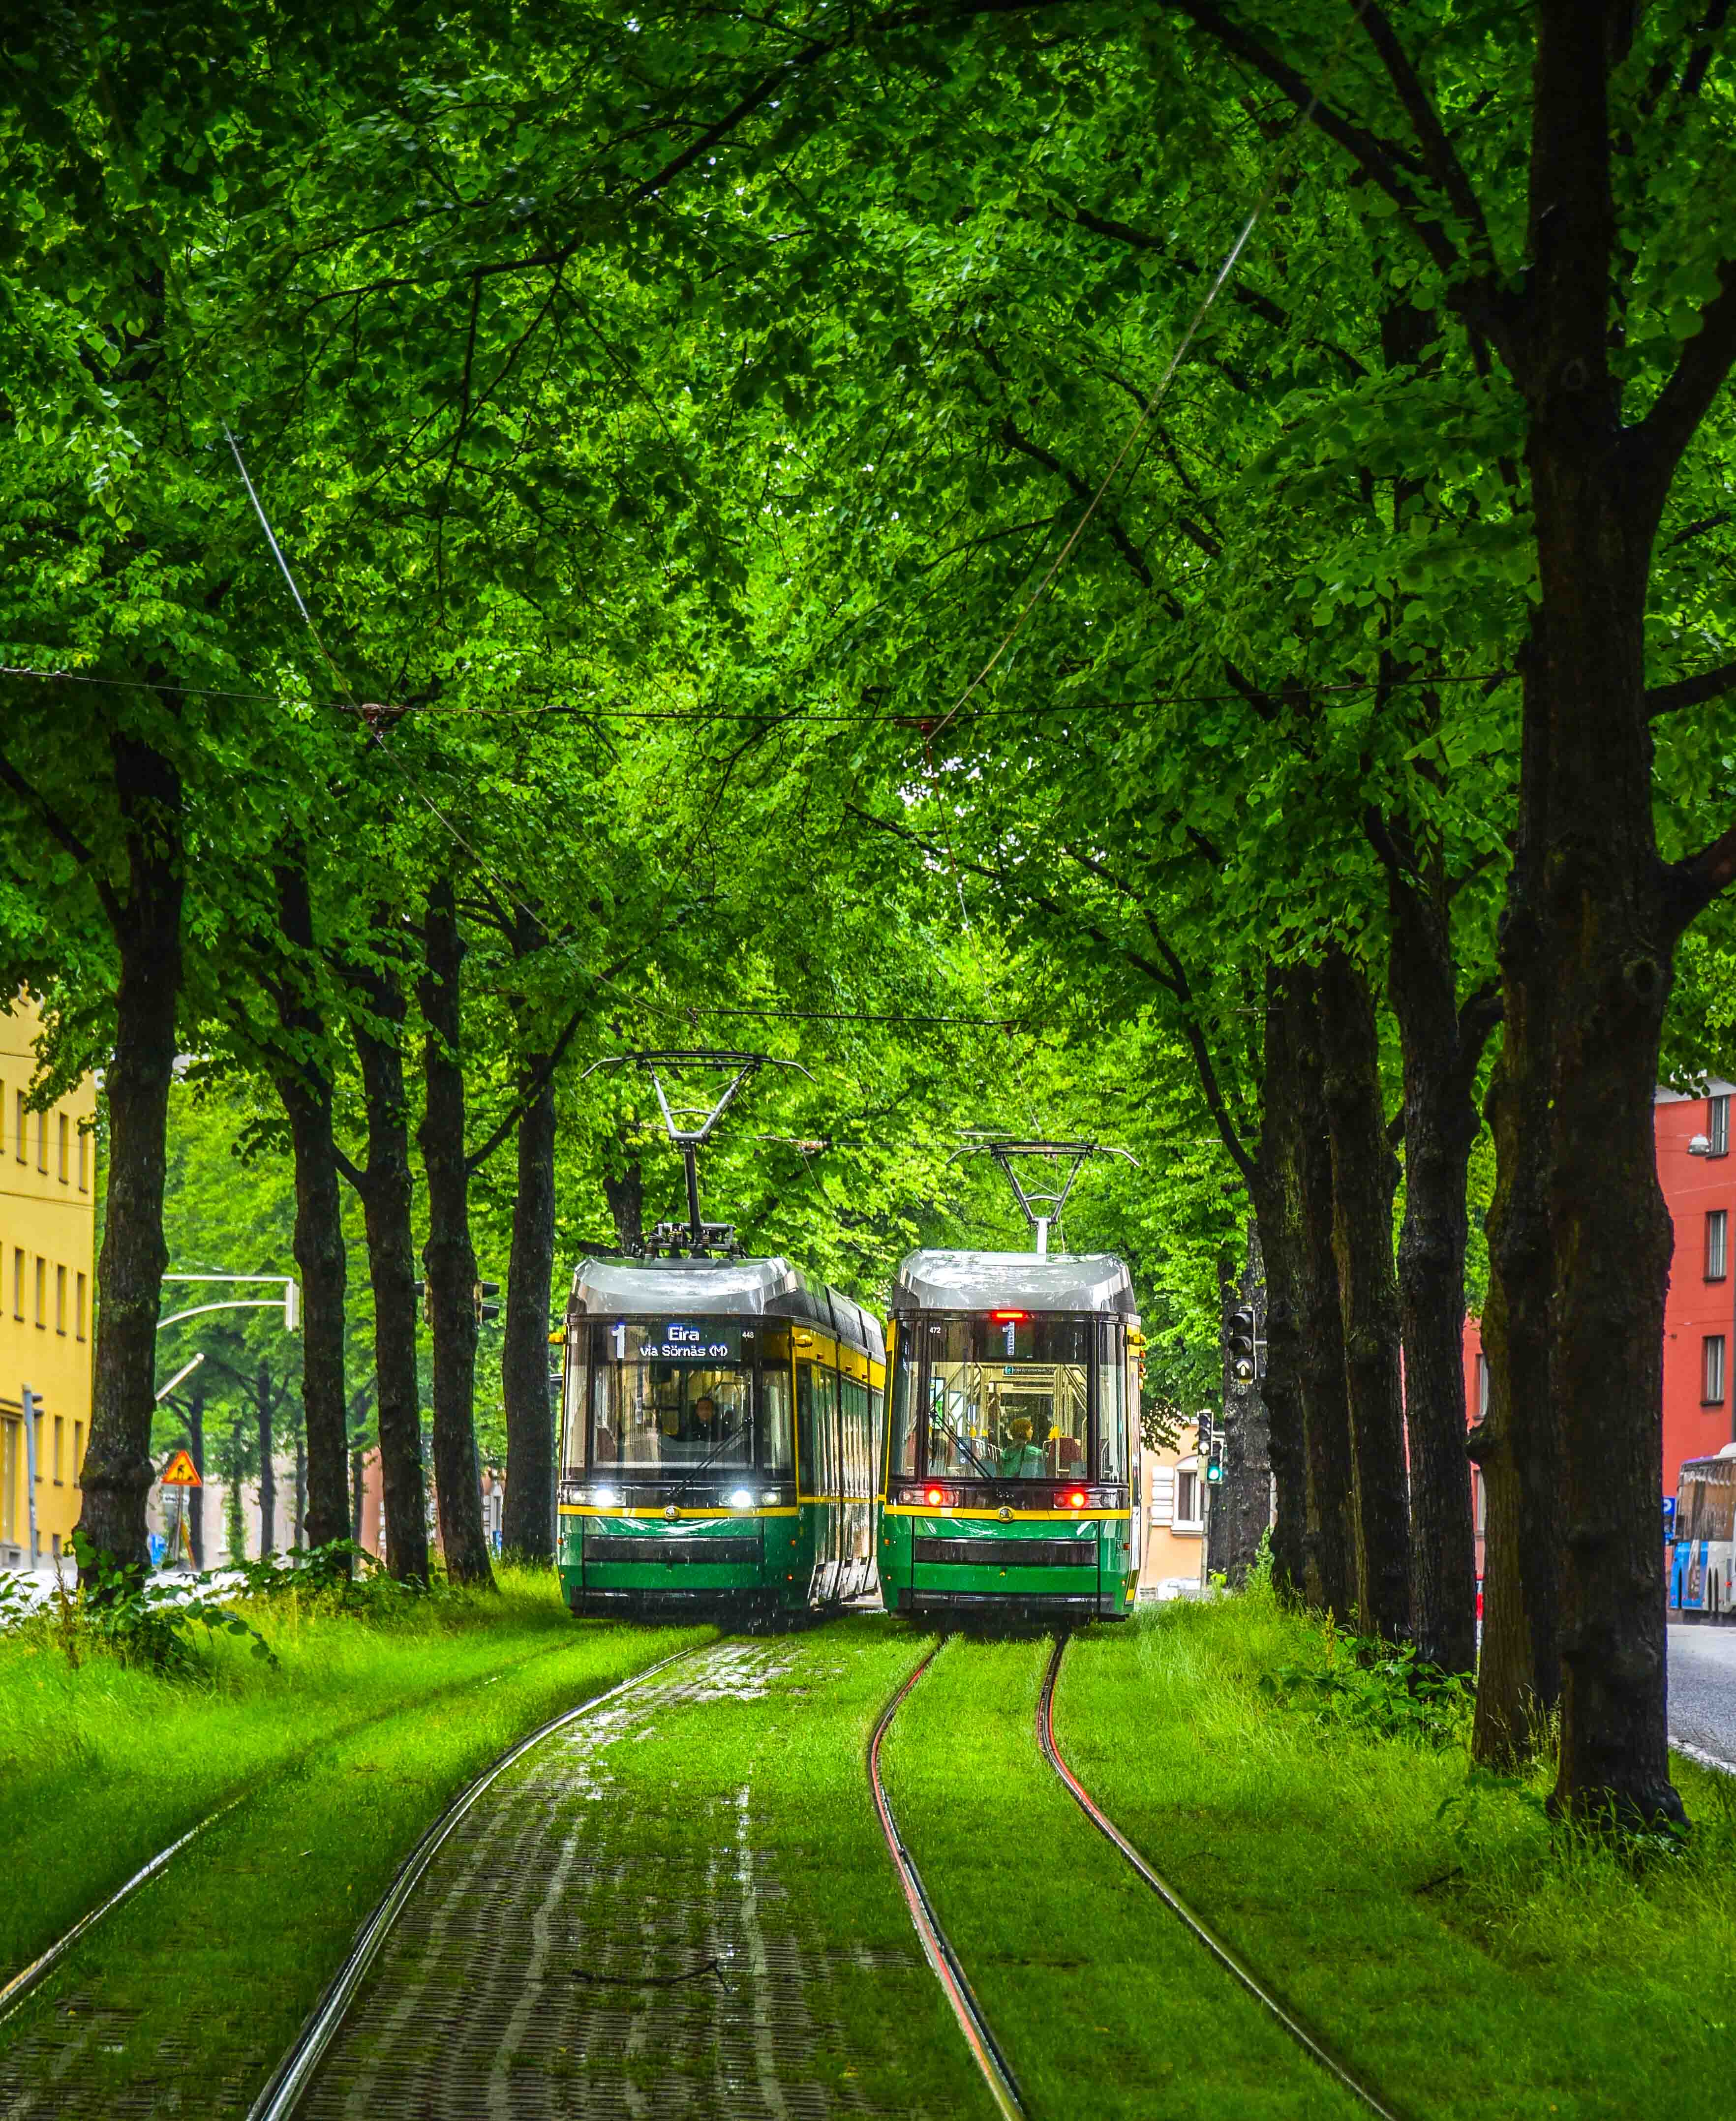 Two trams bypassing each other in tracks surrounded by trees